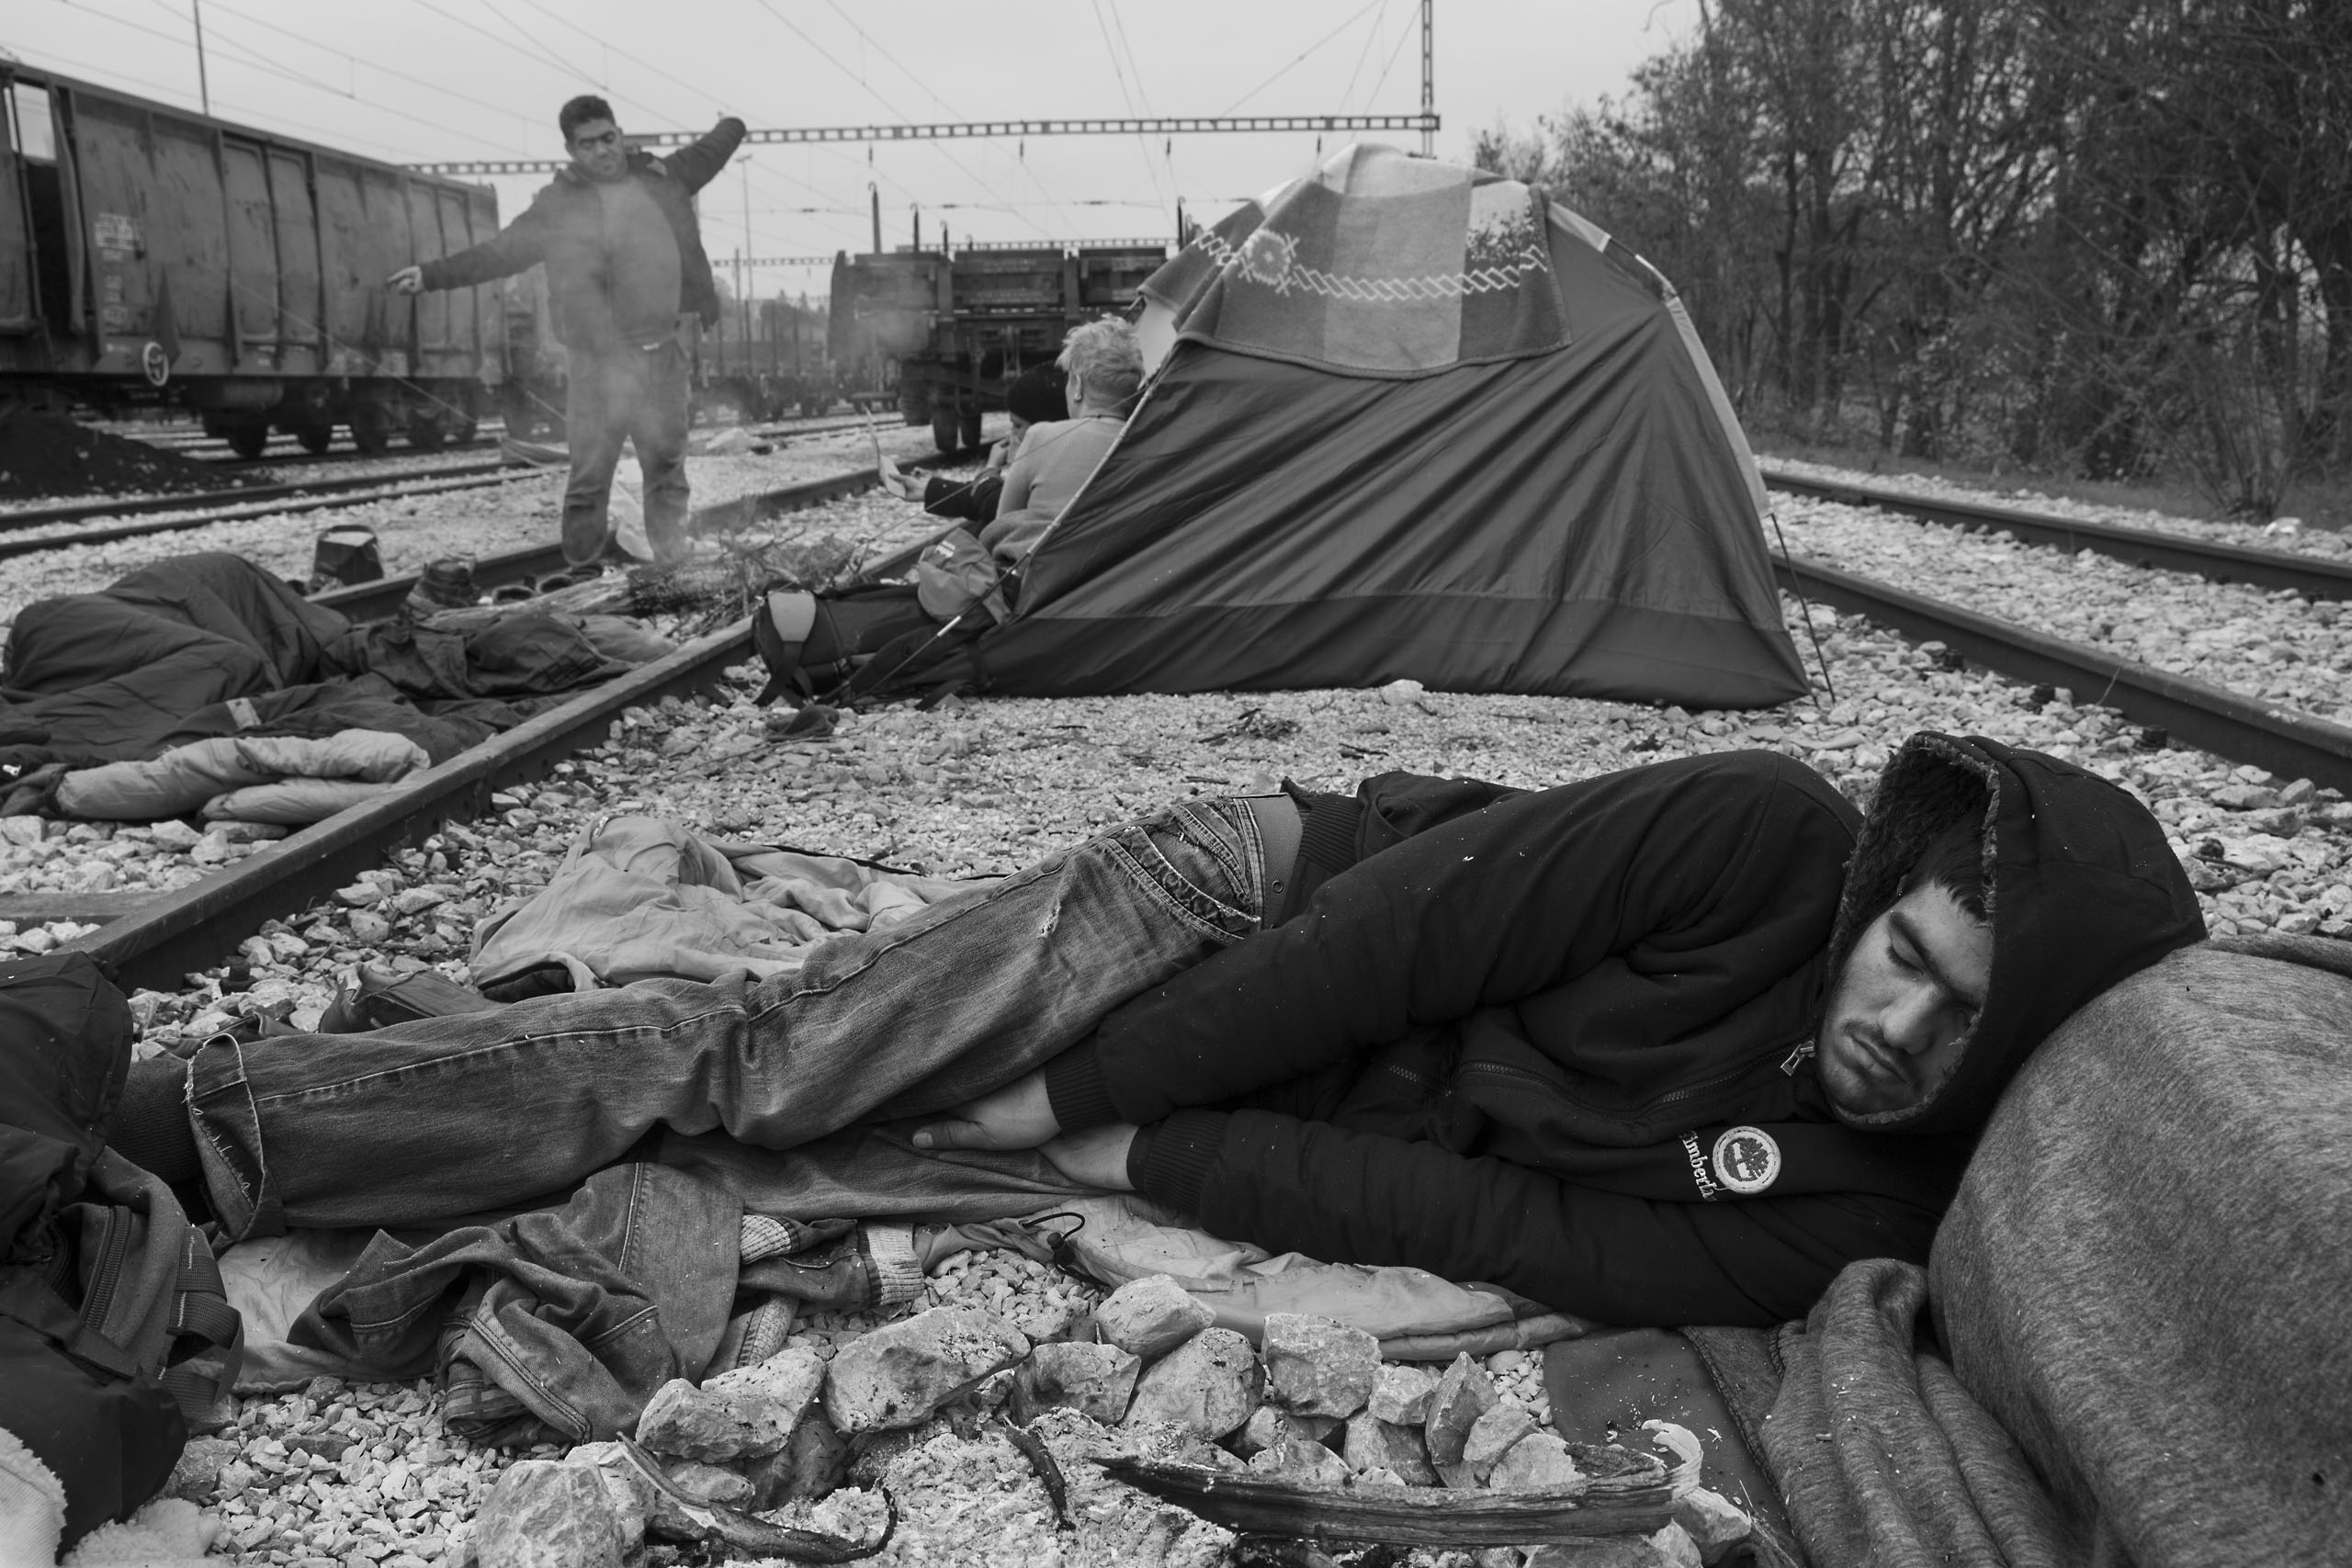 A man sleeps at a camp for refugees near the border town of Idomeni in Greece. Thousands are  stranded in Greece because of border closures in the Balkans, March 17, 2016.